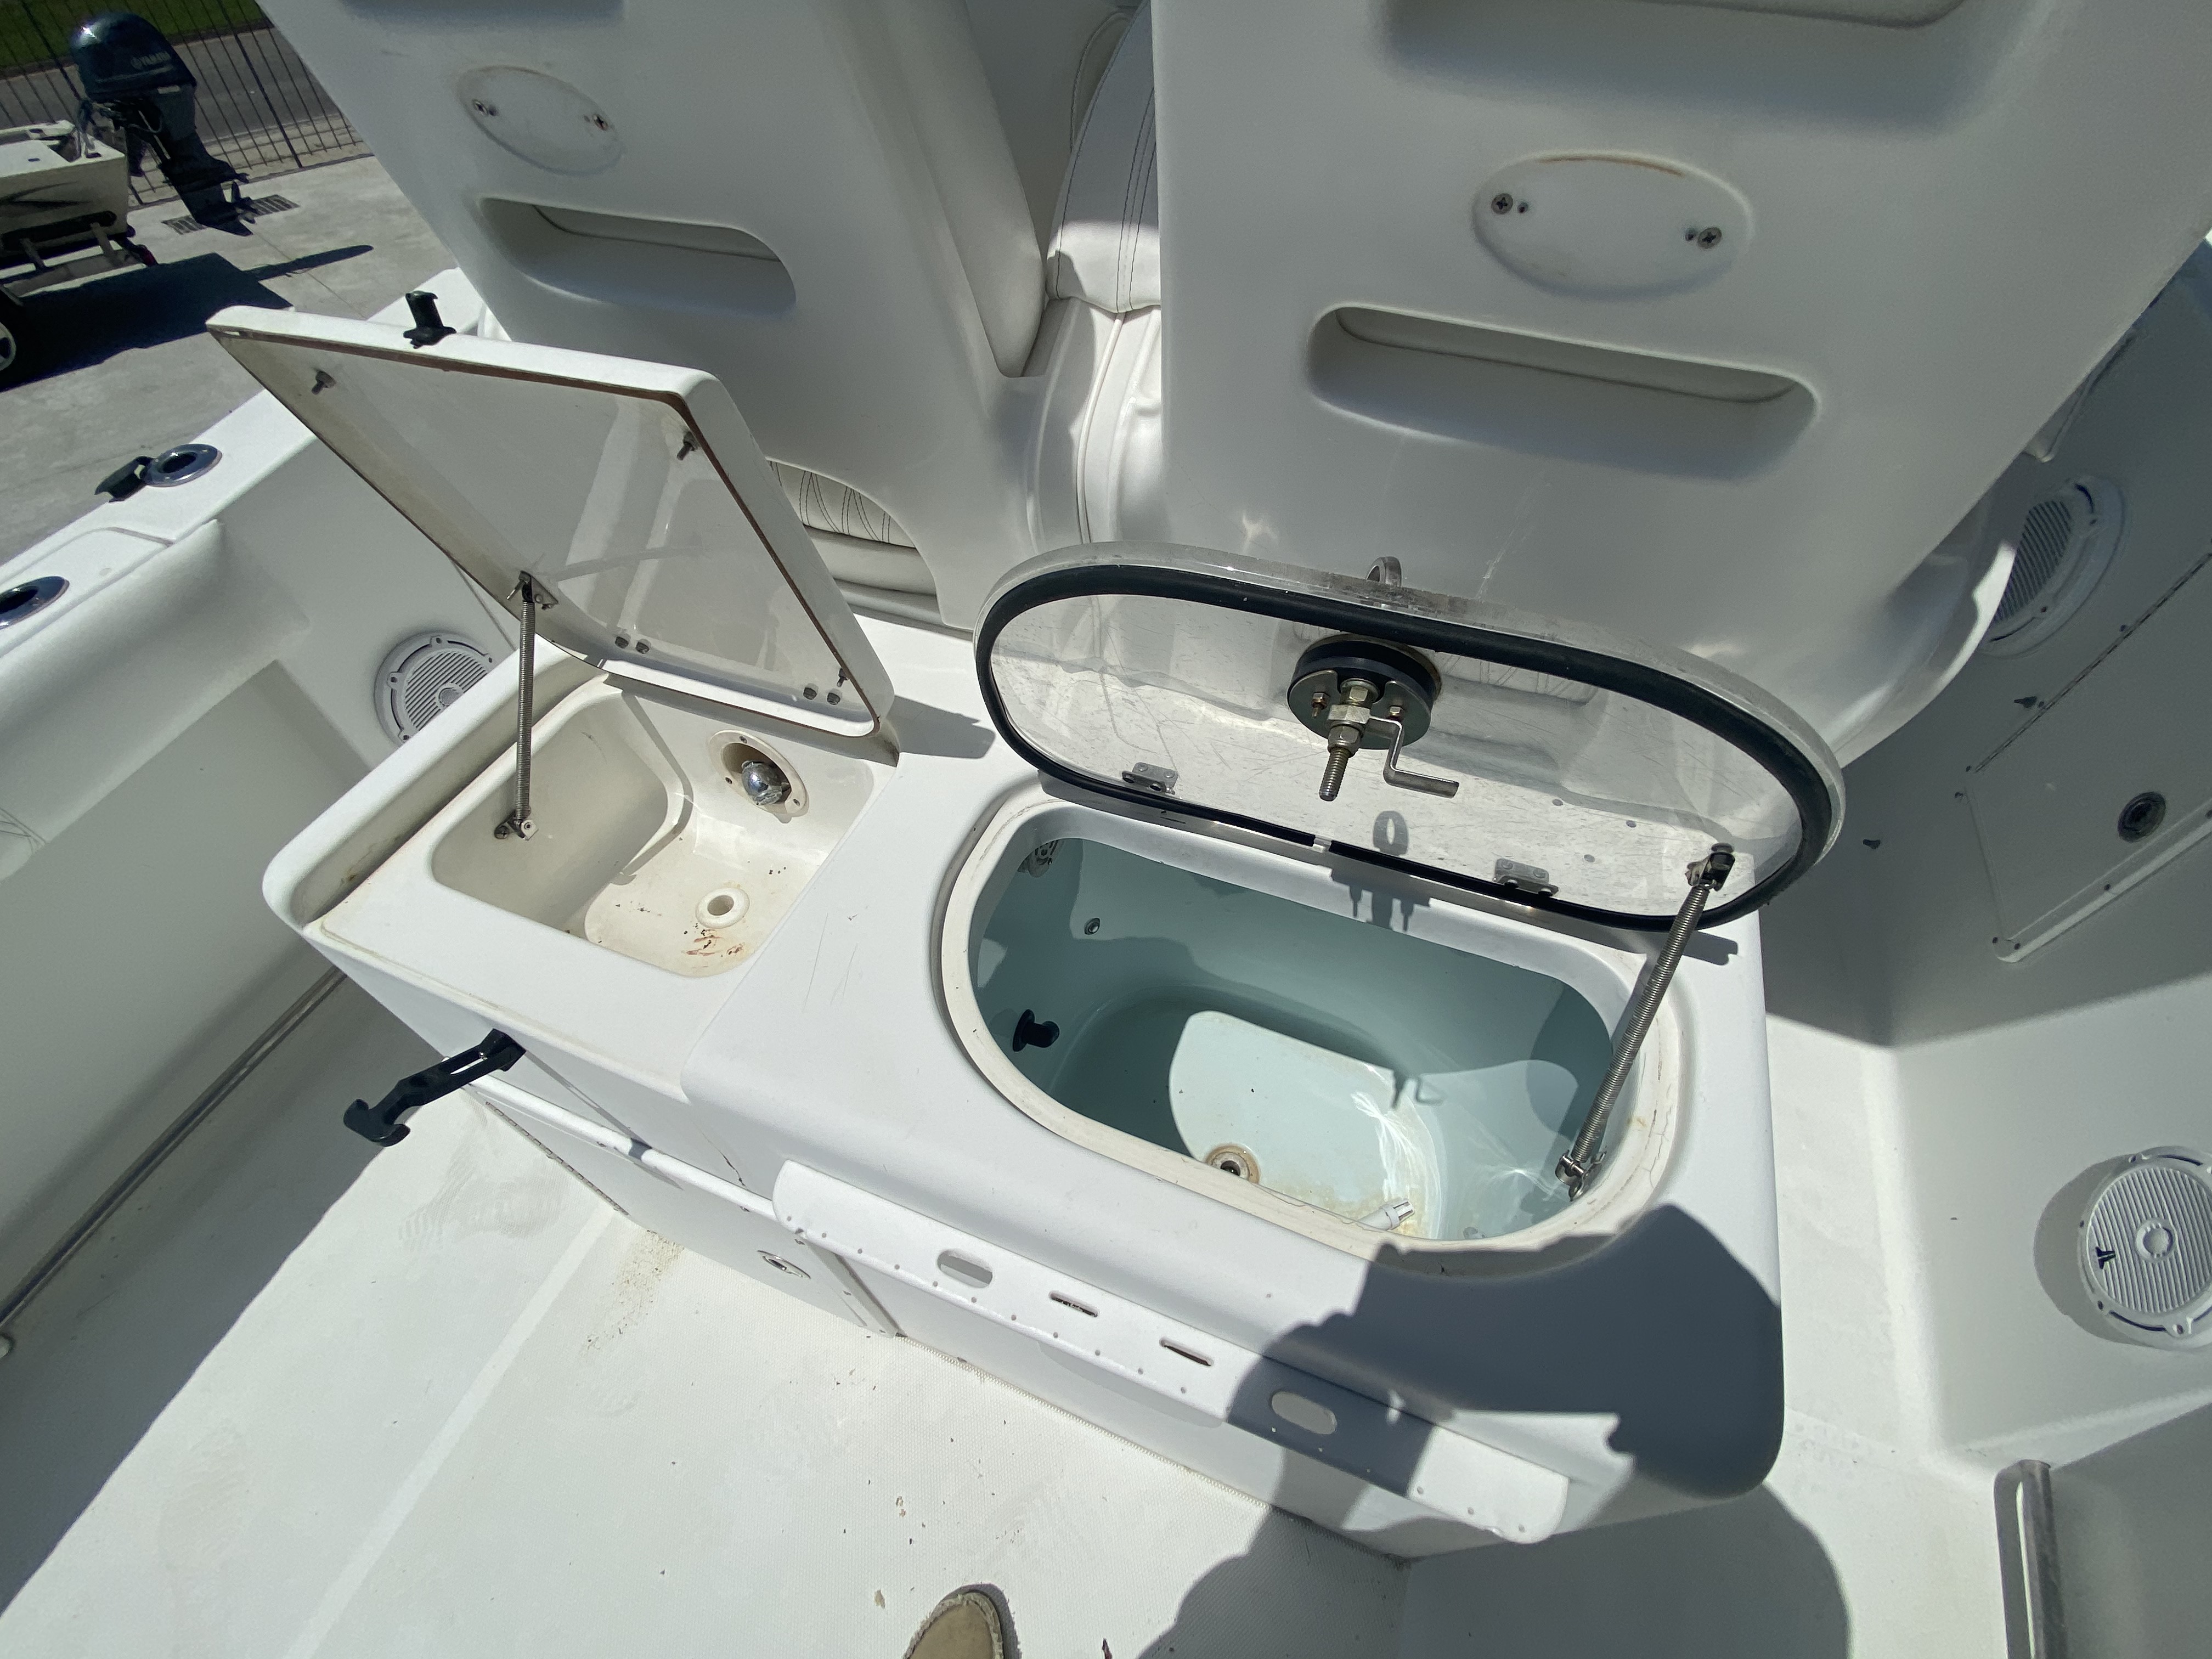 2008 Sea Hunt boat for sale, model of the boat is 29 Gamefish & Image # 30 of 31